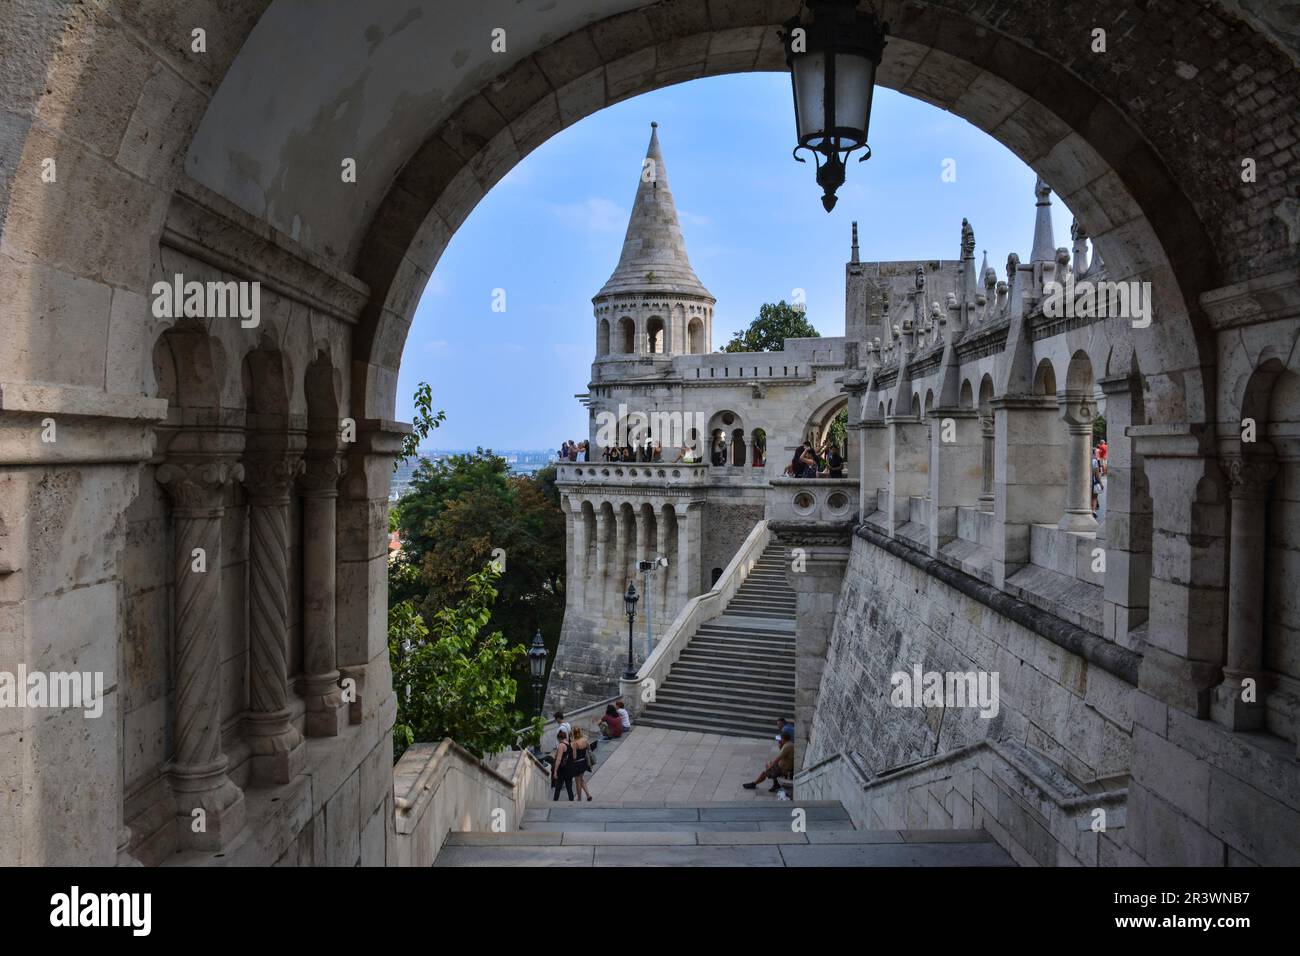 Picturesque View of the Fisherman's Bastion in Budapest, Hungary Stock Photo